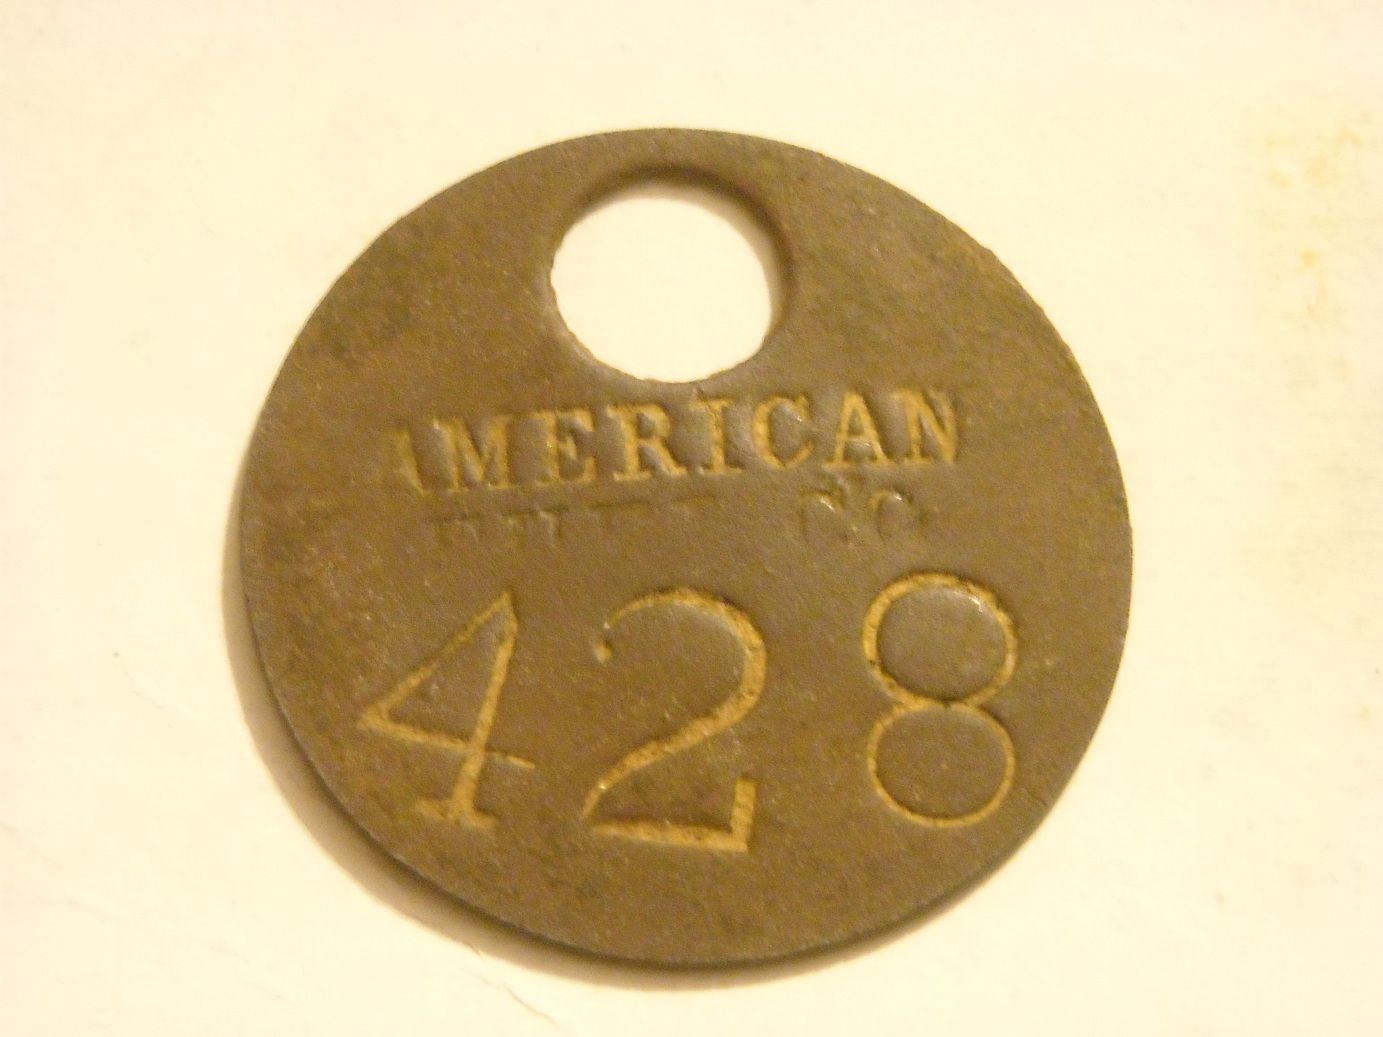 American Fuel Co. Miner Tag found in 
Trussville, Al. on 1/20/2013